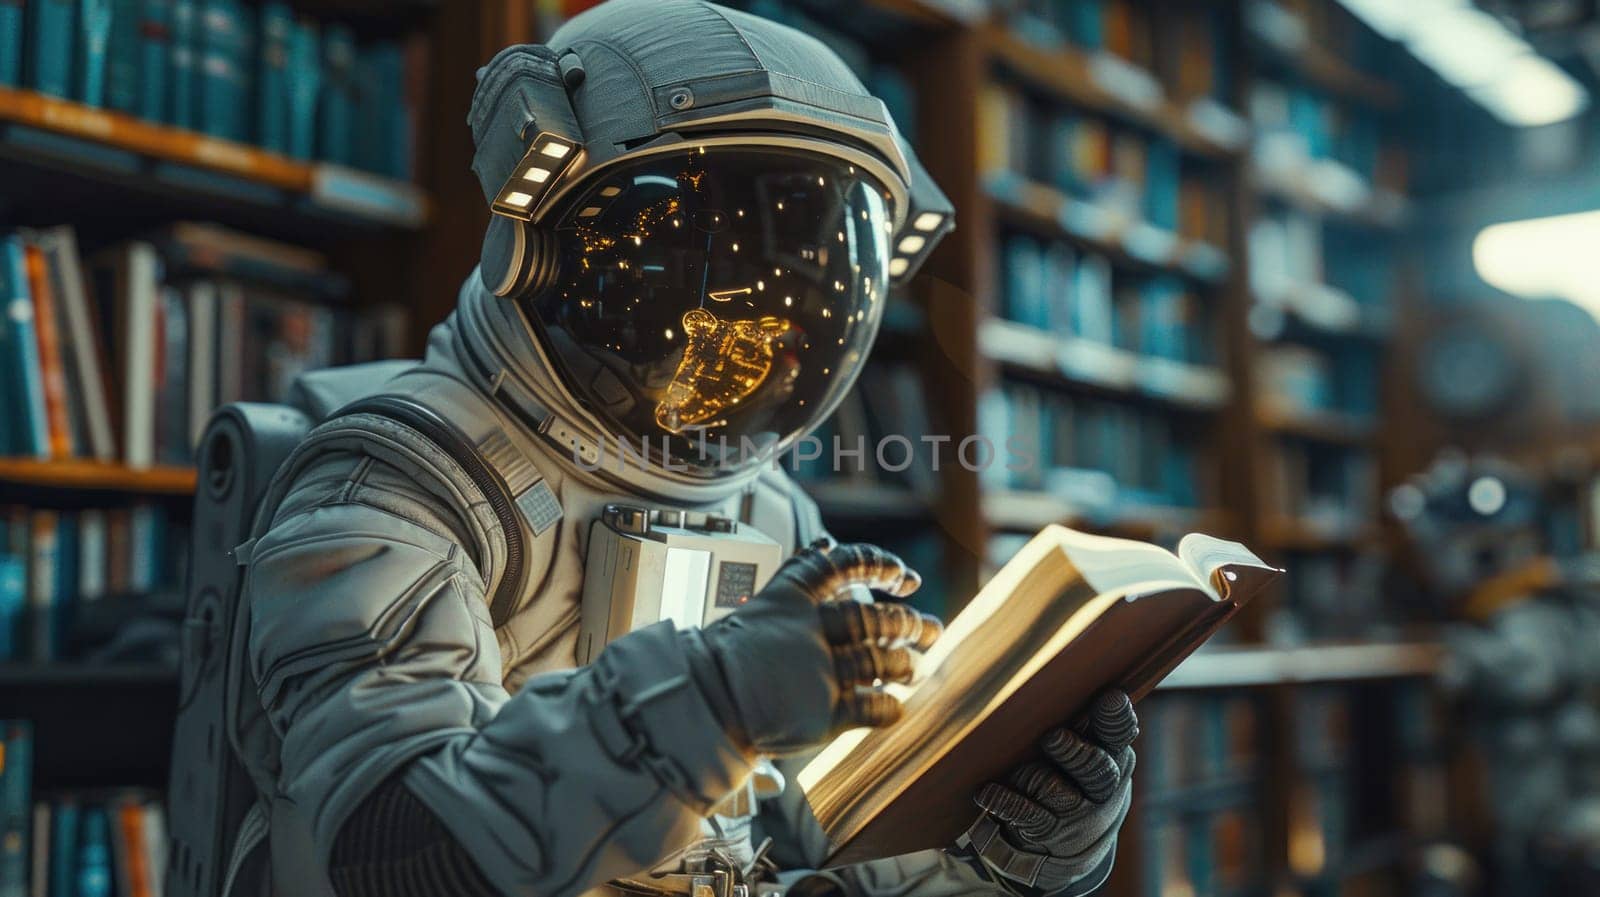 A man in a spacesuit is reading a book in a library by golfmerrymaker